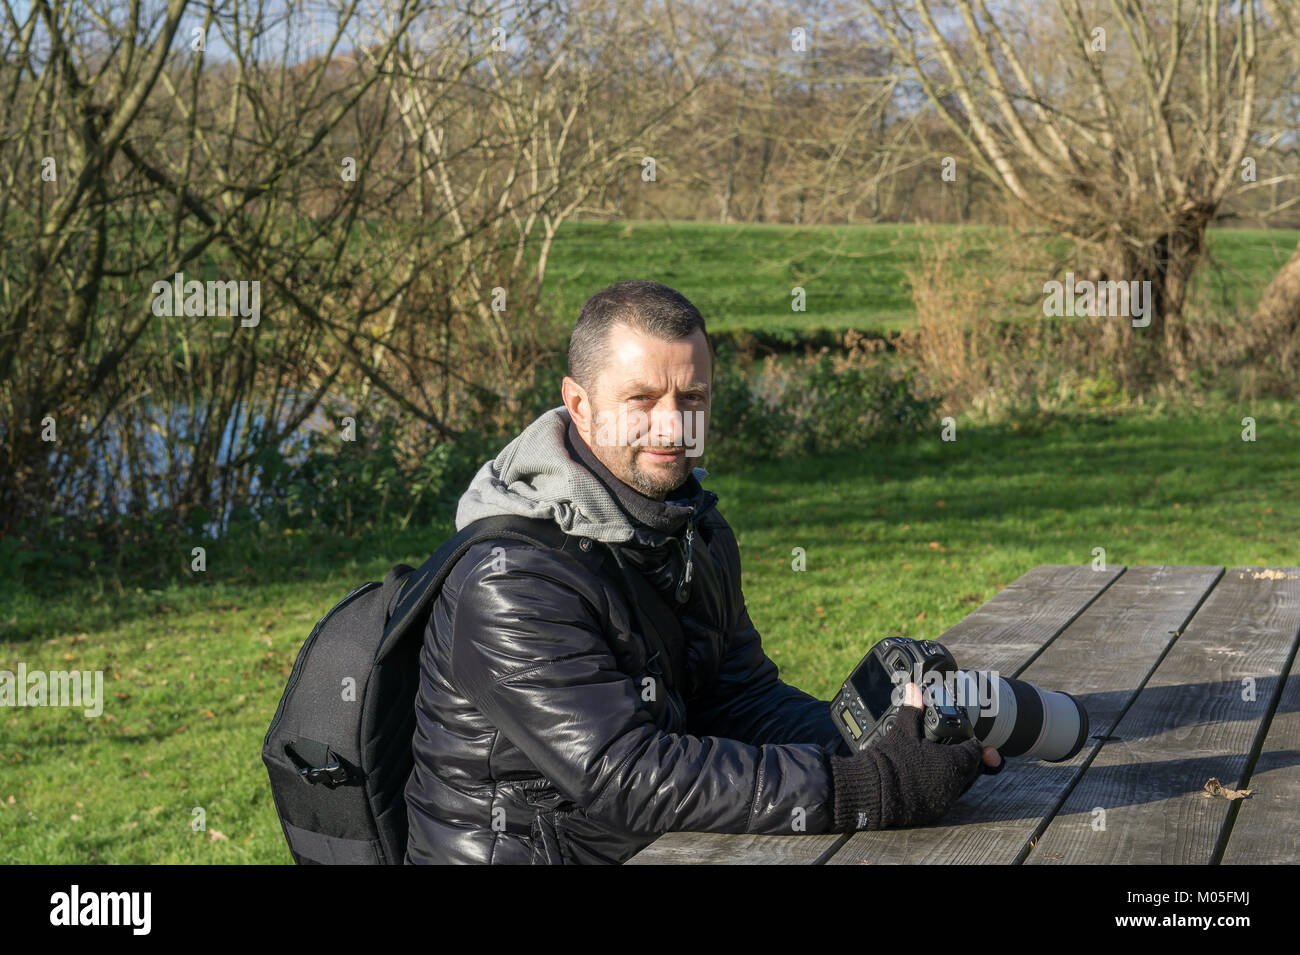 Professional nature photographer rests his Canon camera on picnic table & takes a break from taking pictures in the park on a cold winter morning. Stock Photo